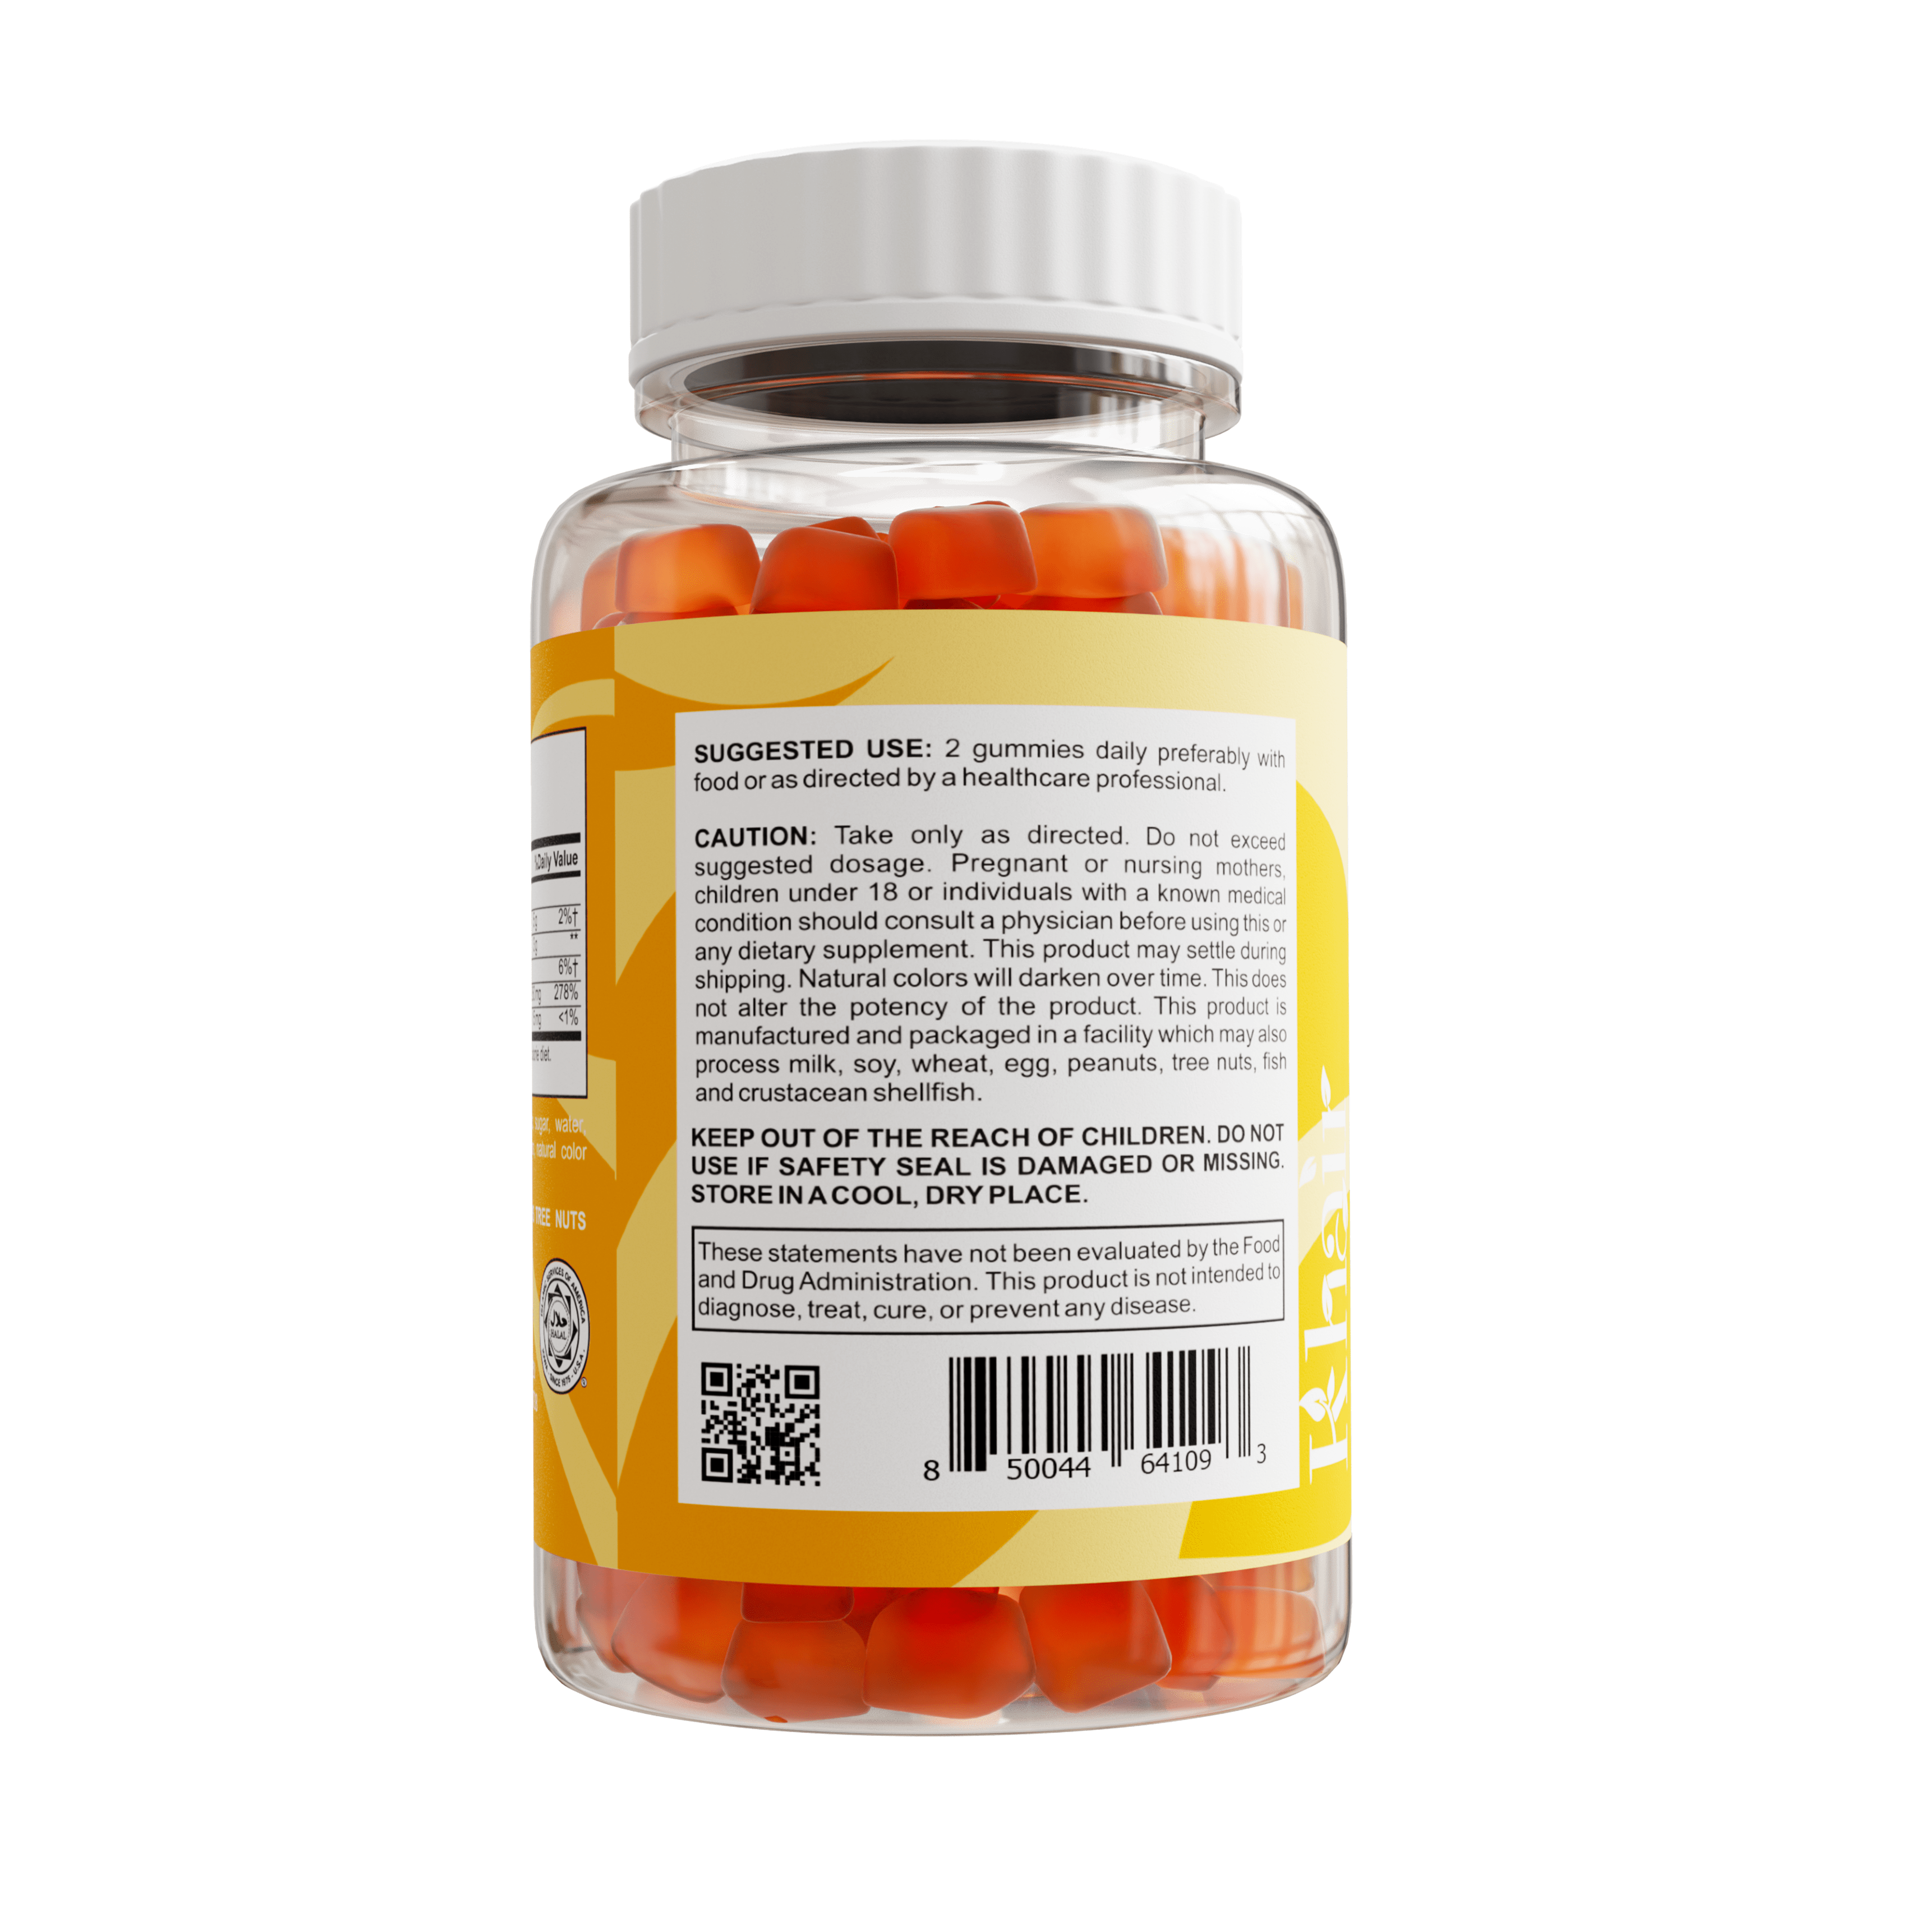 The back label of a bottle of vitamin C gummies with usage instructions, cautionary statements, allergen information, and a reminder to store in a cool, dry place, including a barcode at the bottom.